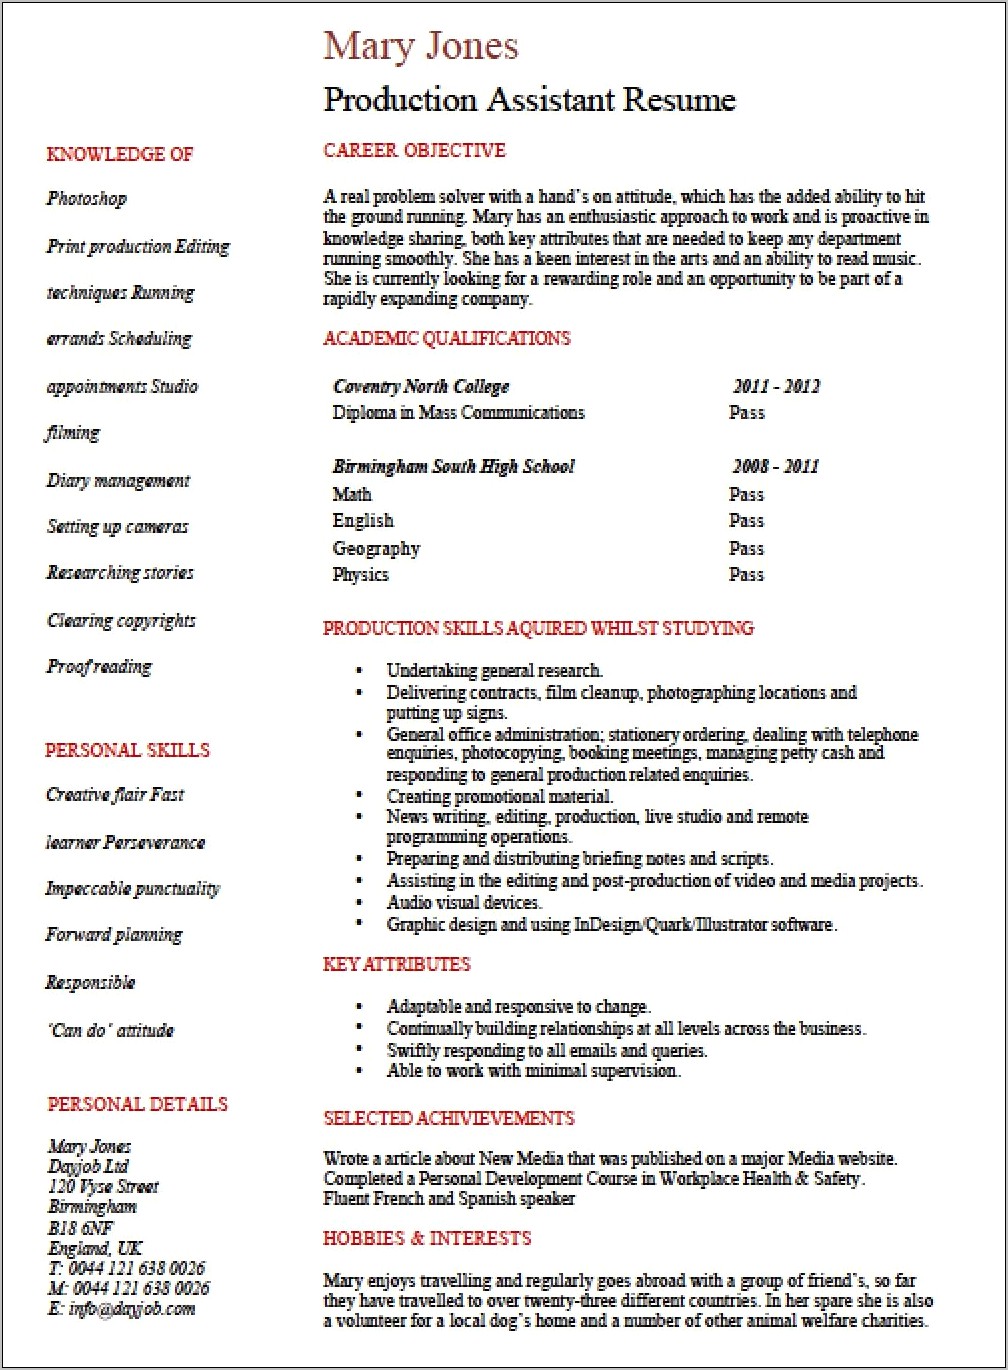 Marketing Assistant Resume Objective Examples